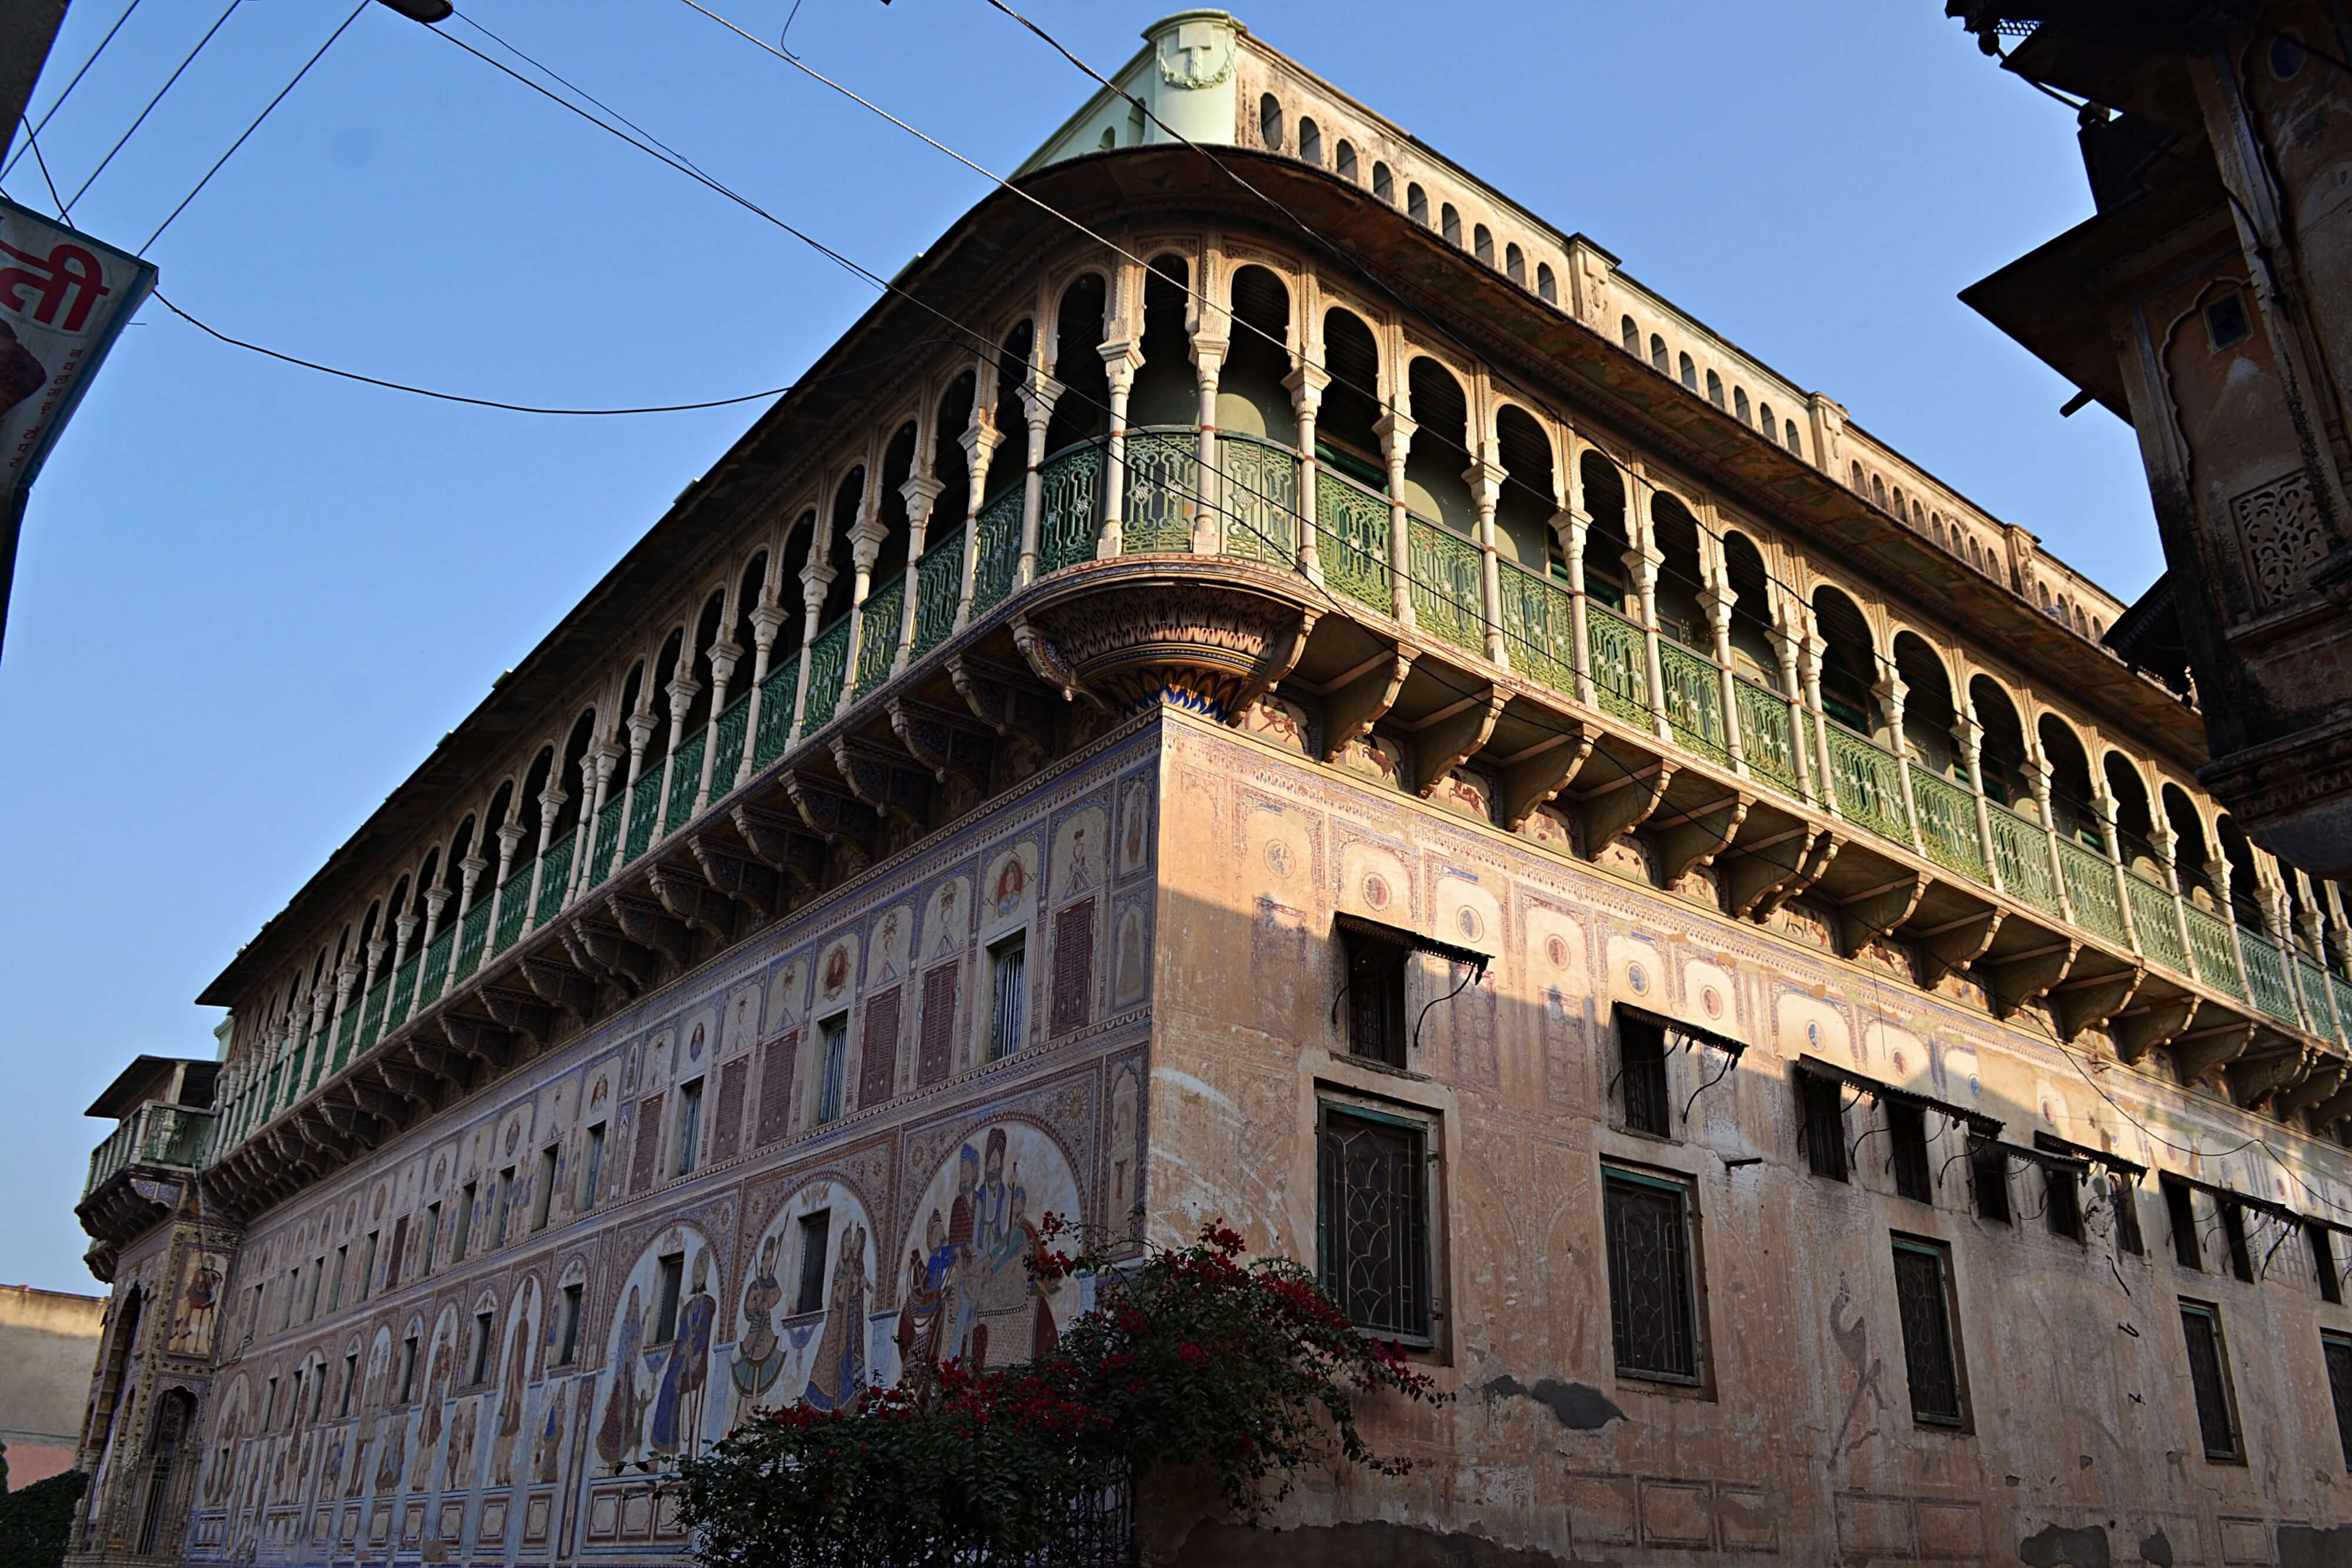 Some have been restored, and many are now museums open to tourists, such as the Ramnath Podar Haveli and Museum (pictured).